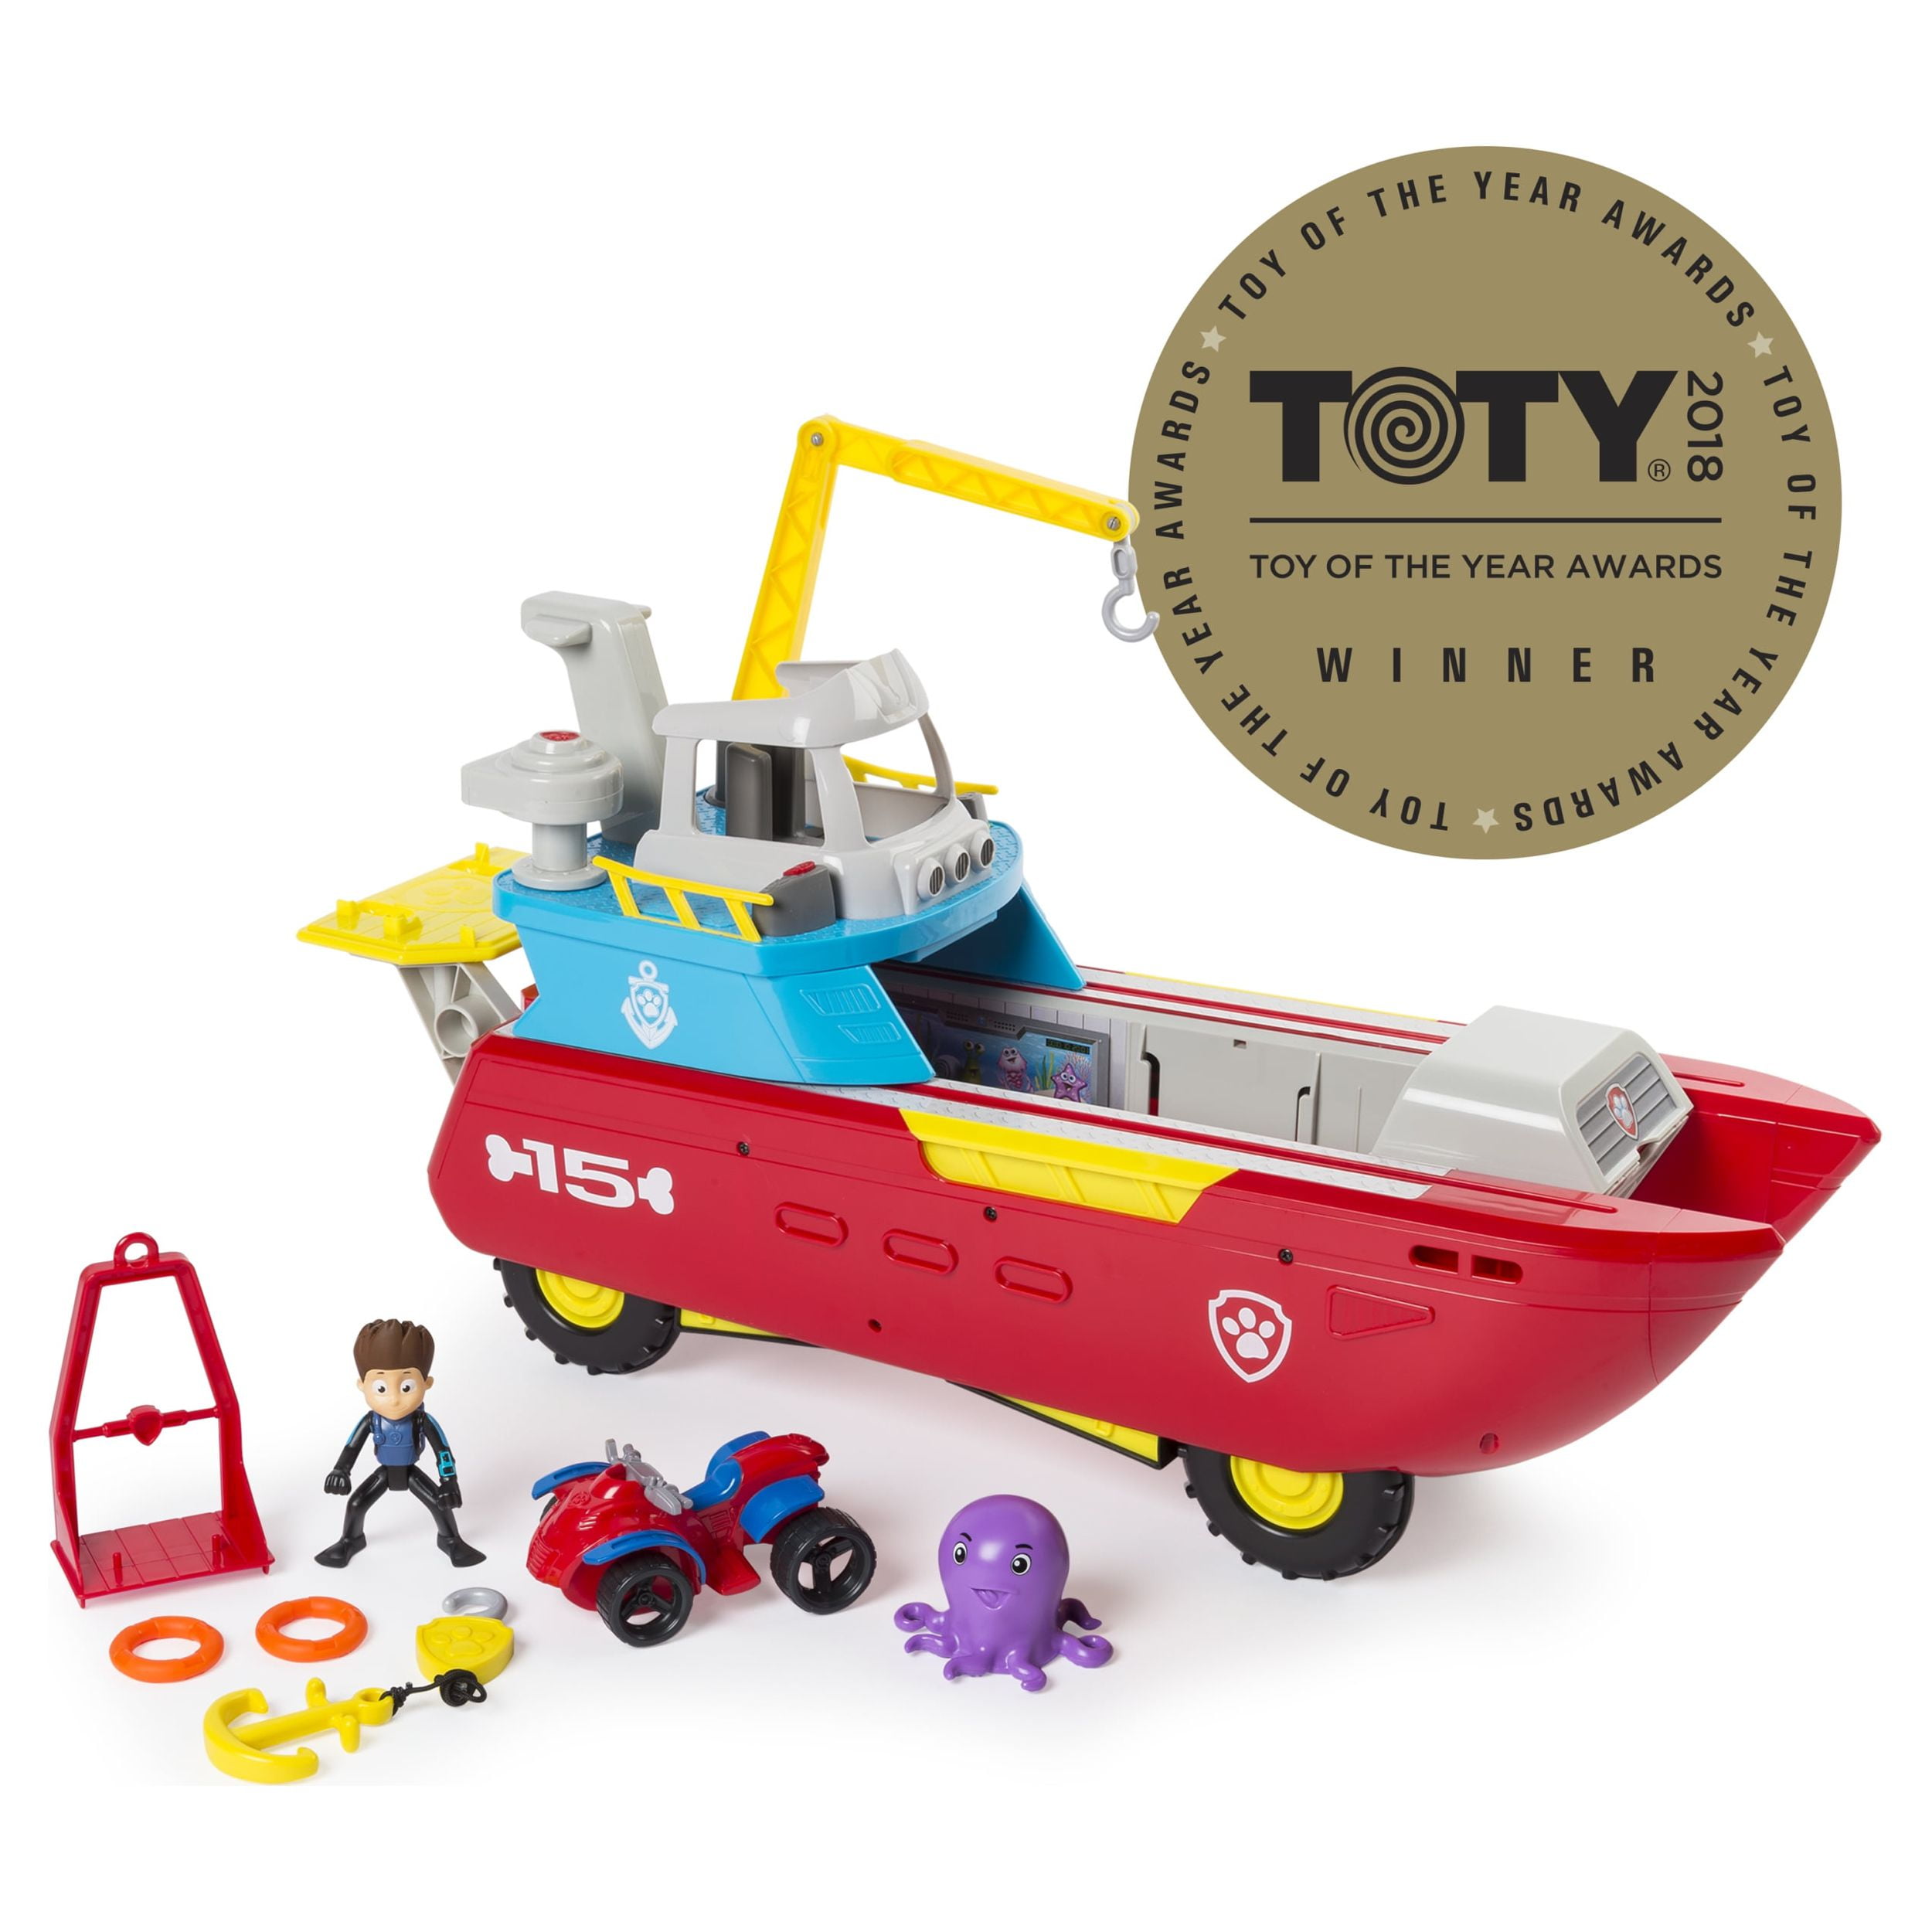  Paw Patrol Sea Patrol, Sea Patroller Transforming Toy Vehicle  with Lights & Sounds, Ages 3 & up : Toys & Games